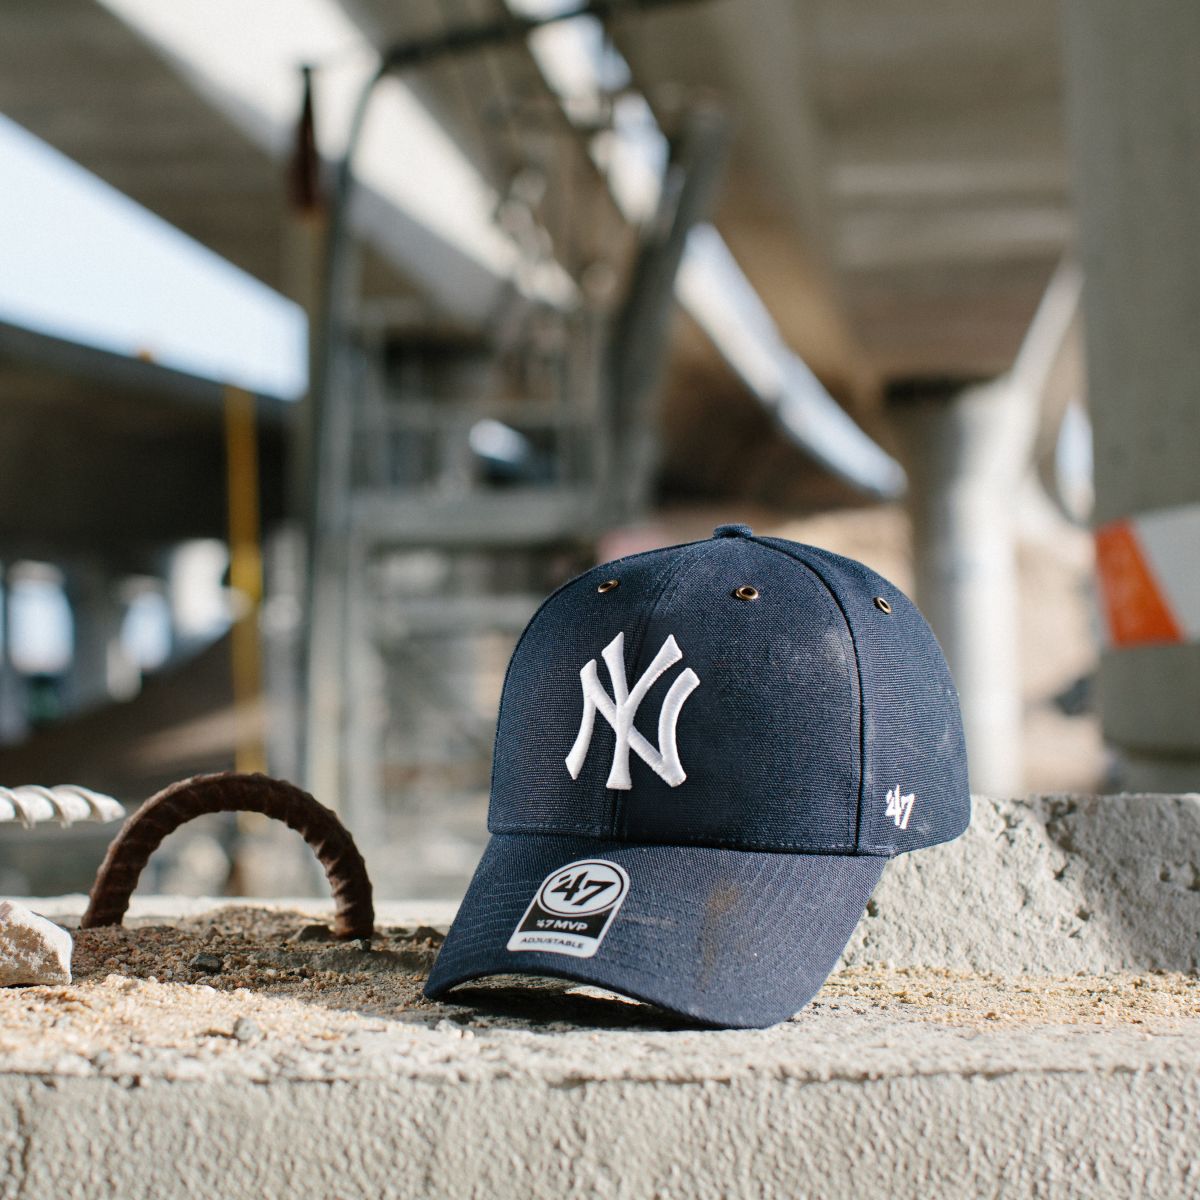 Carhartt & ’47 Drop New OUTWORK x OUTROOT MLB Hat Collection